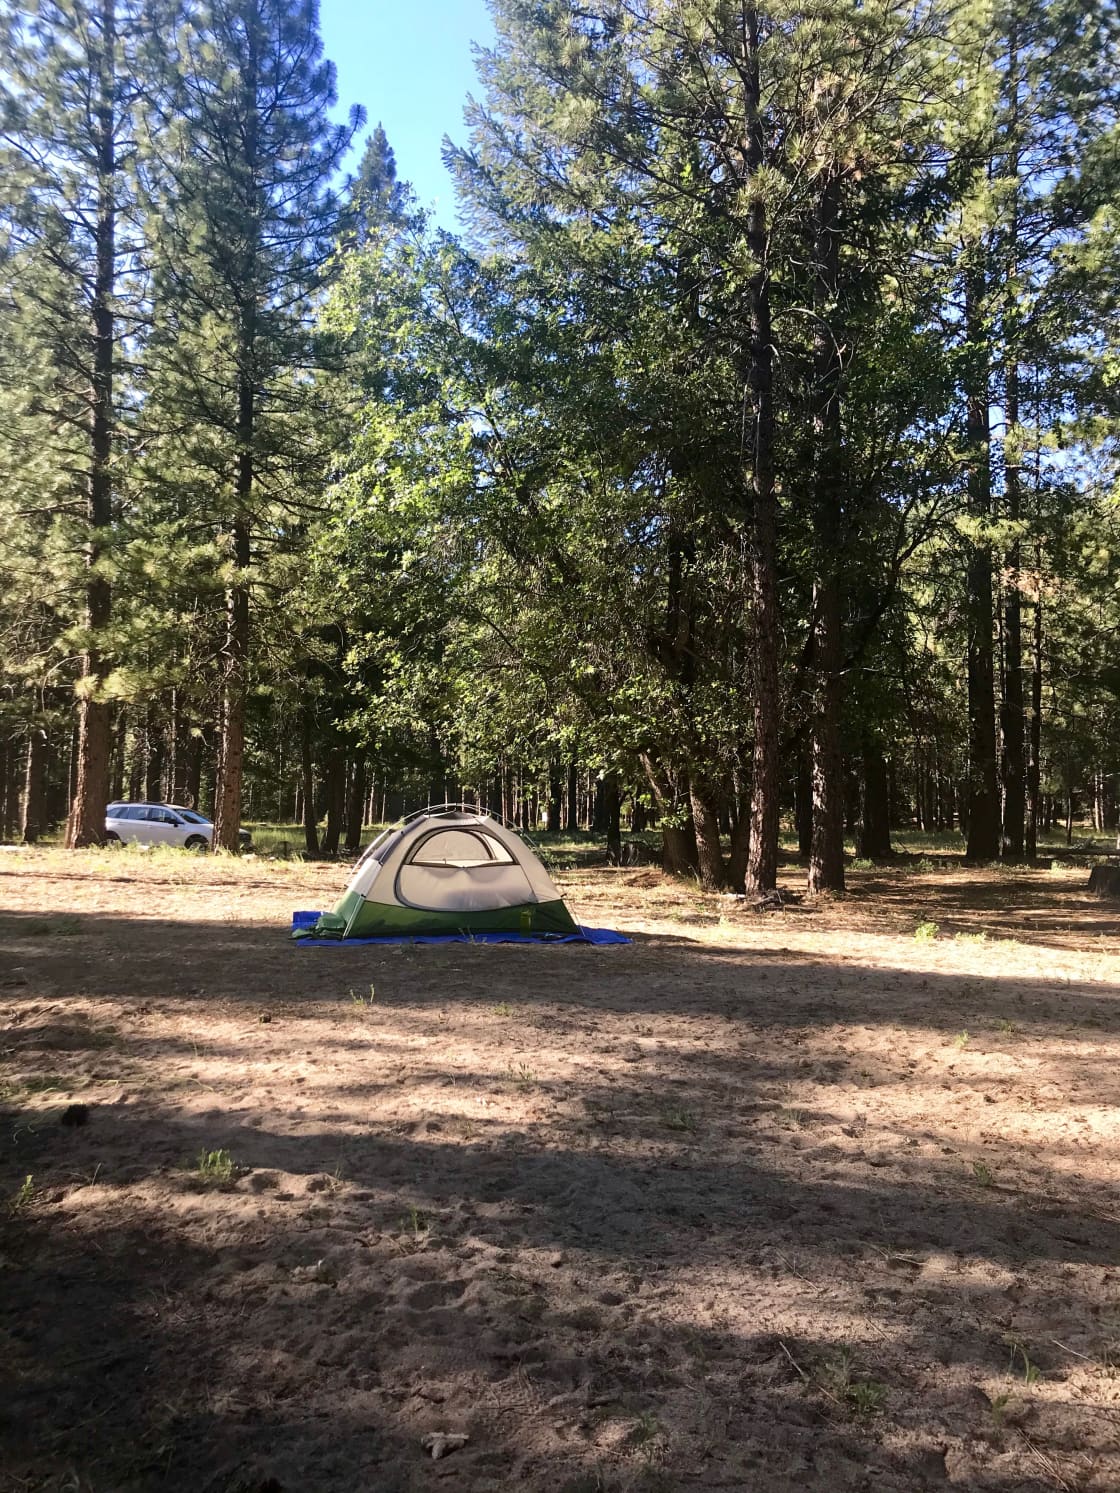 The campsite-in the middle of the Plumas National Forest. So beautiful and secluded! 